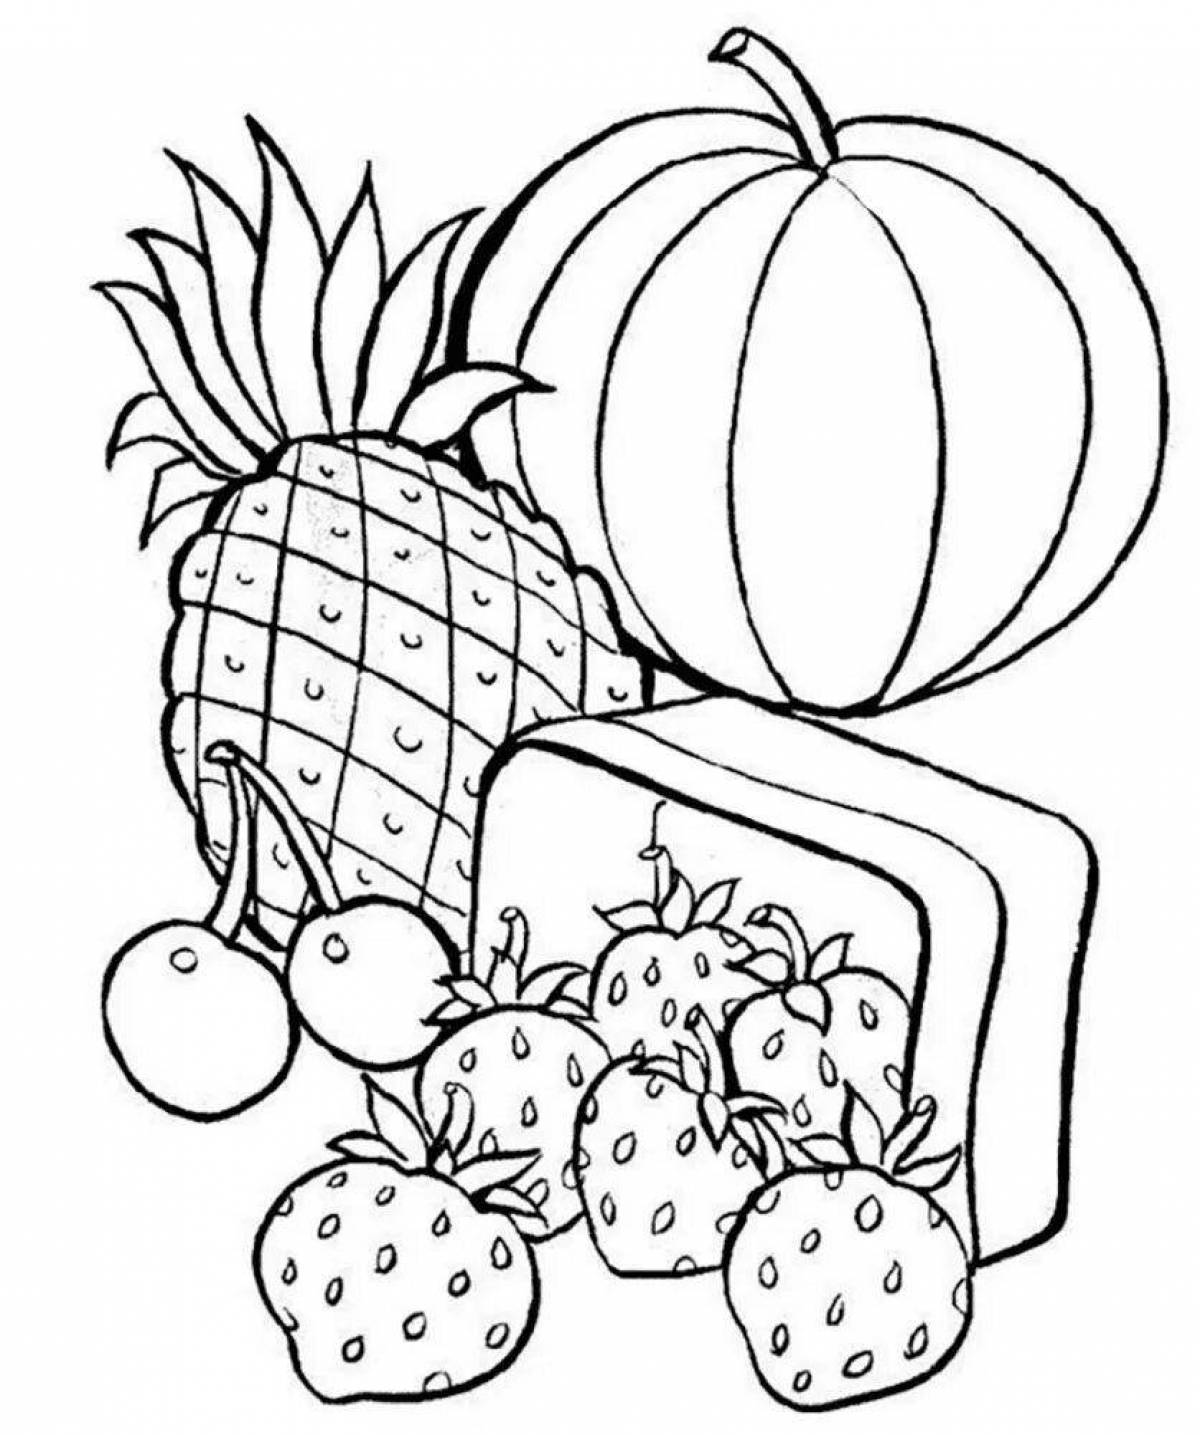 Coloring pages with colorful petals healthy food